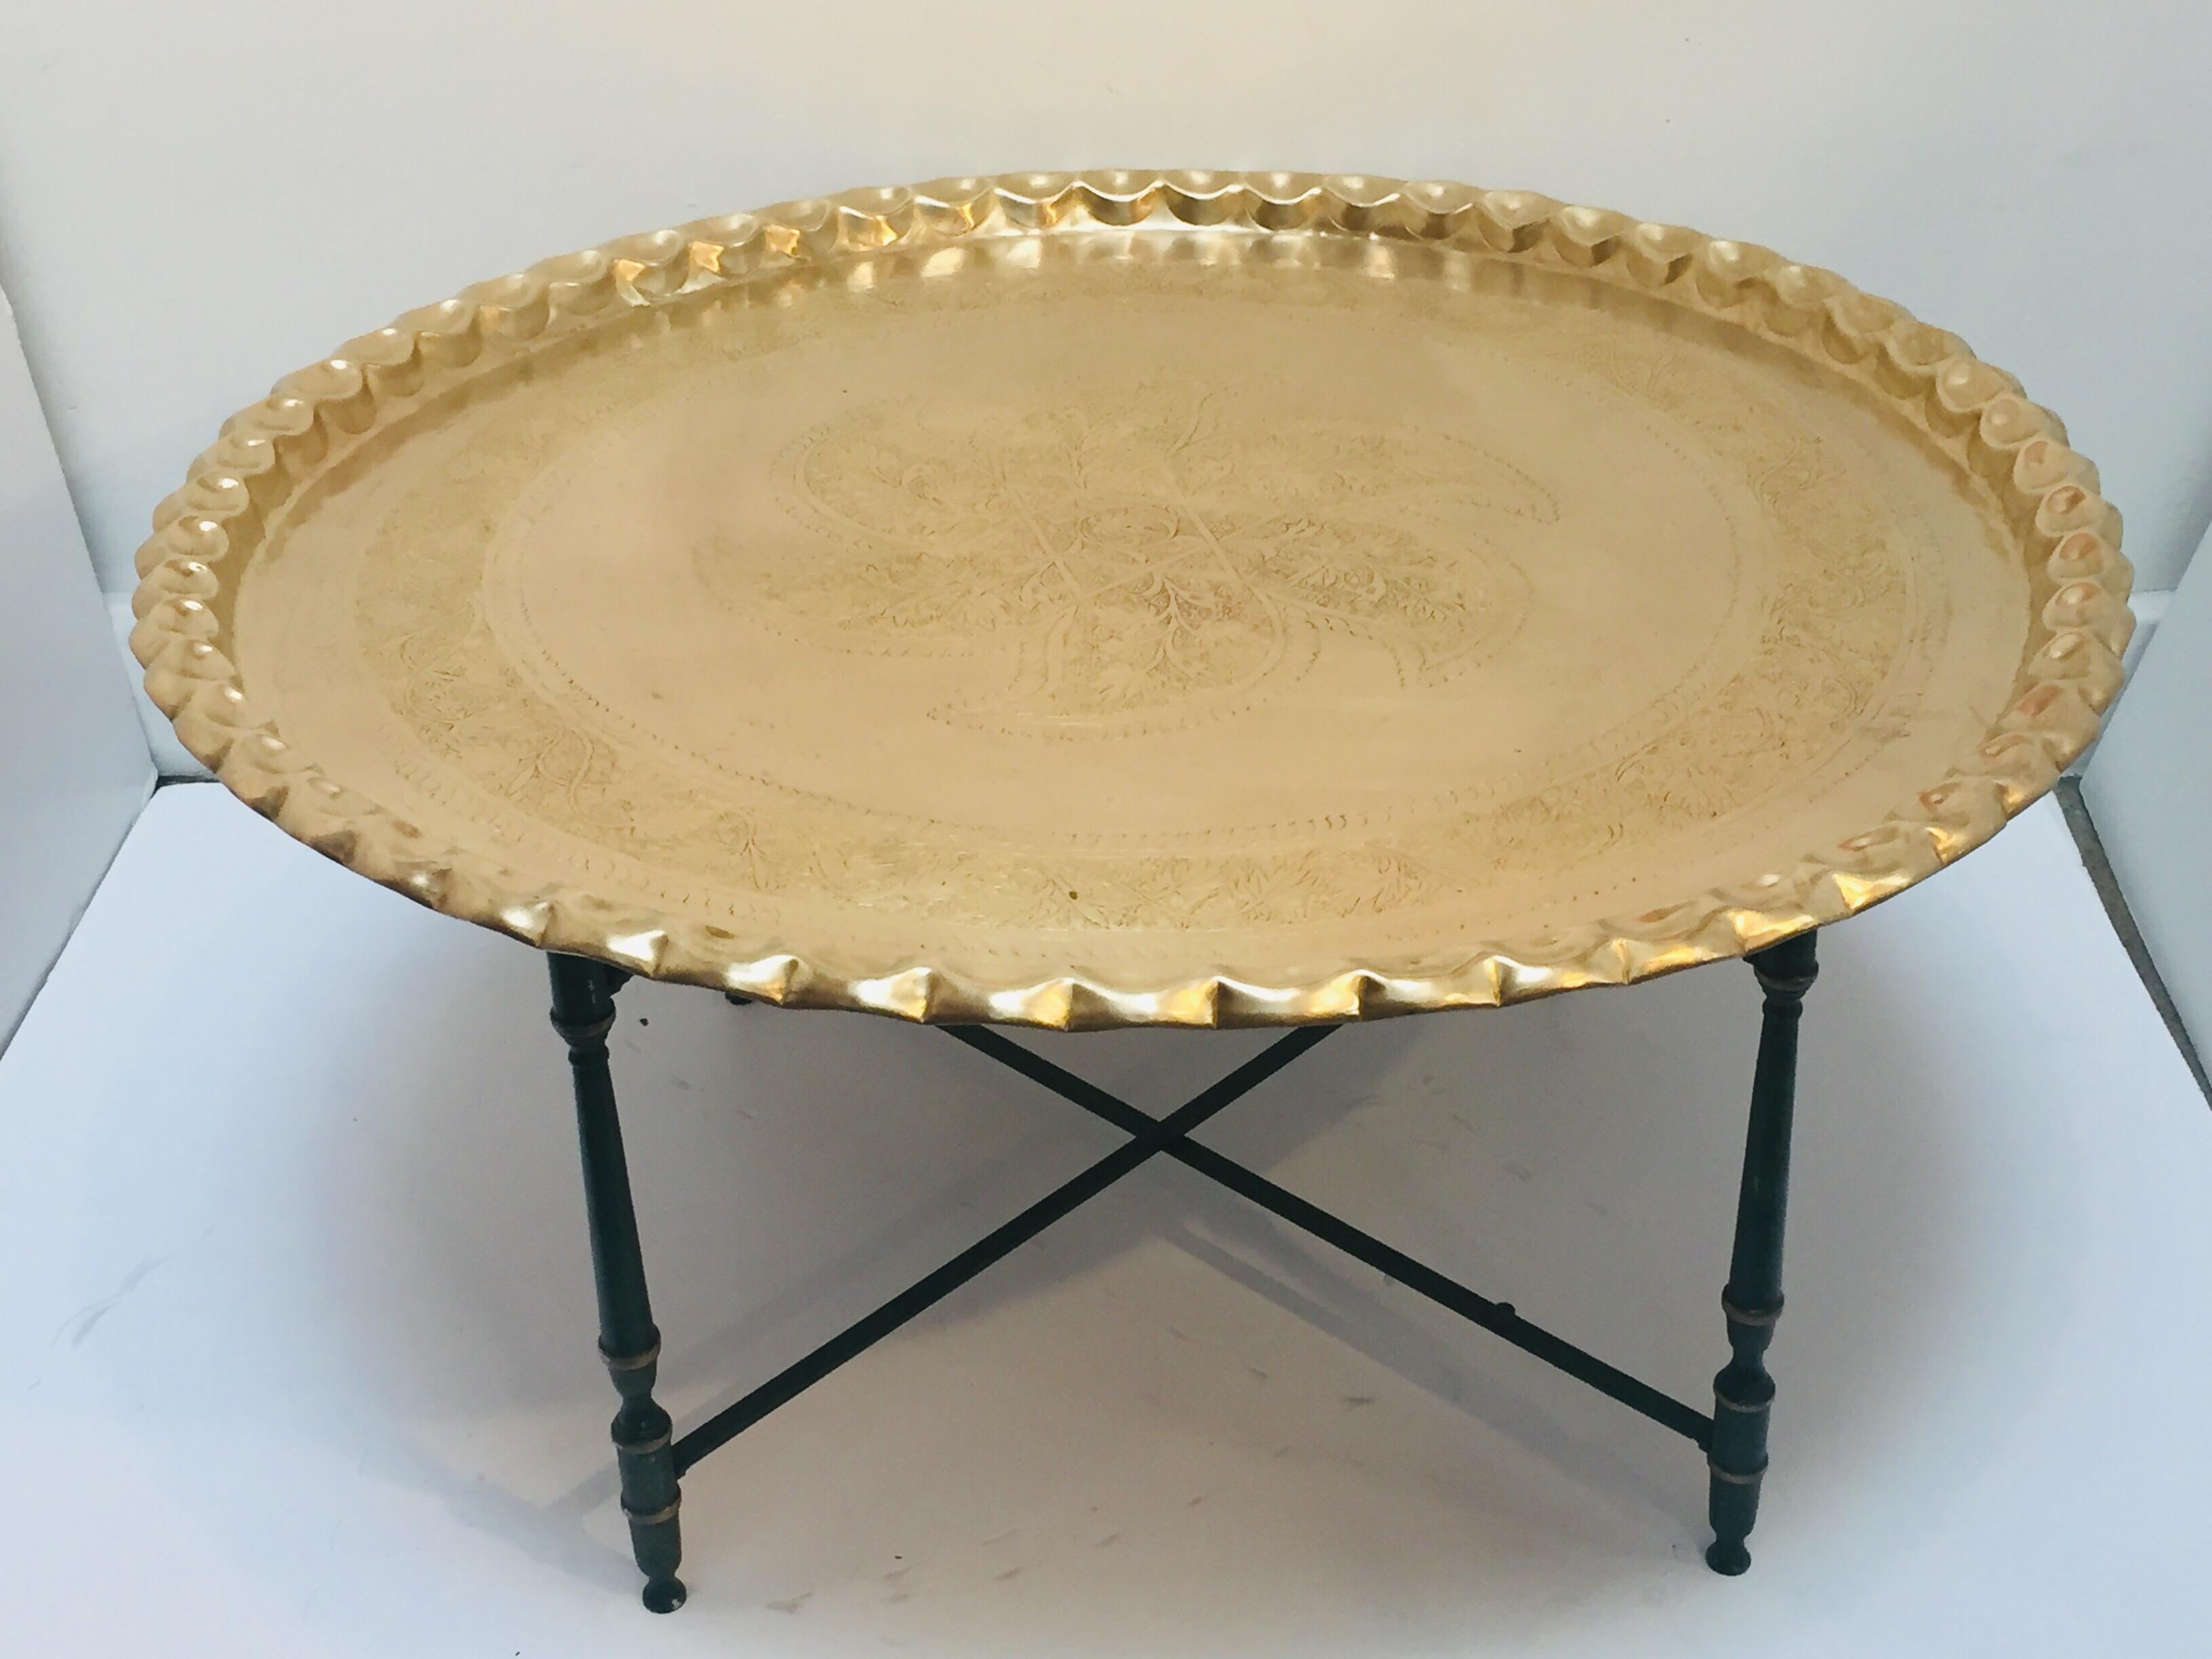 Large round Moroccan brass tray table 40 inches.
Polished brass tray, very good condition, standing on metal folding brass finals.
Very hard to find Mid-Century Modern polished brass tray table.
This large Moorish style hand-hammered brass tray